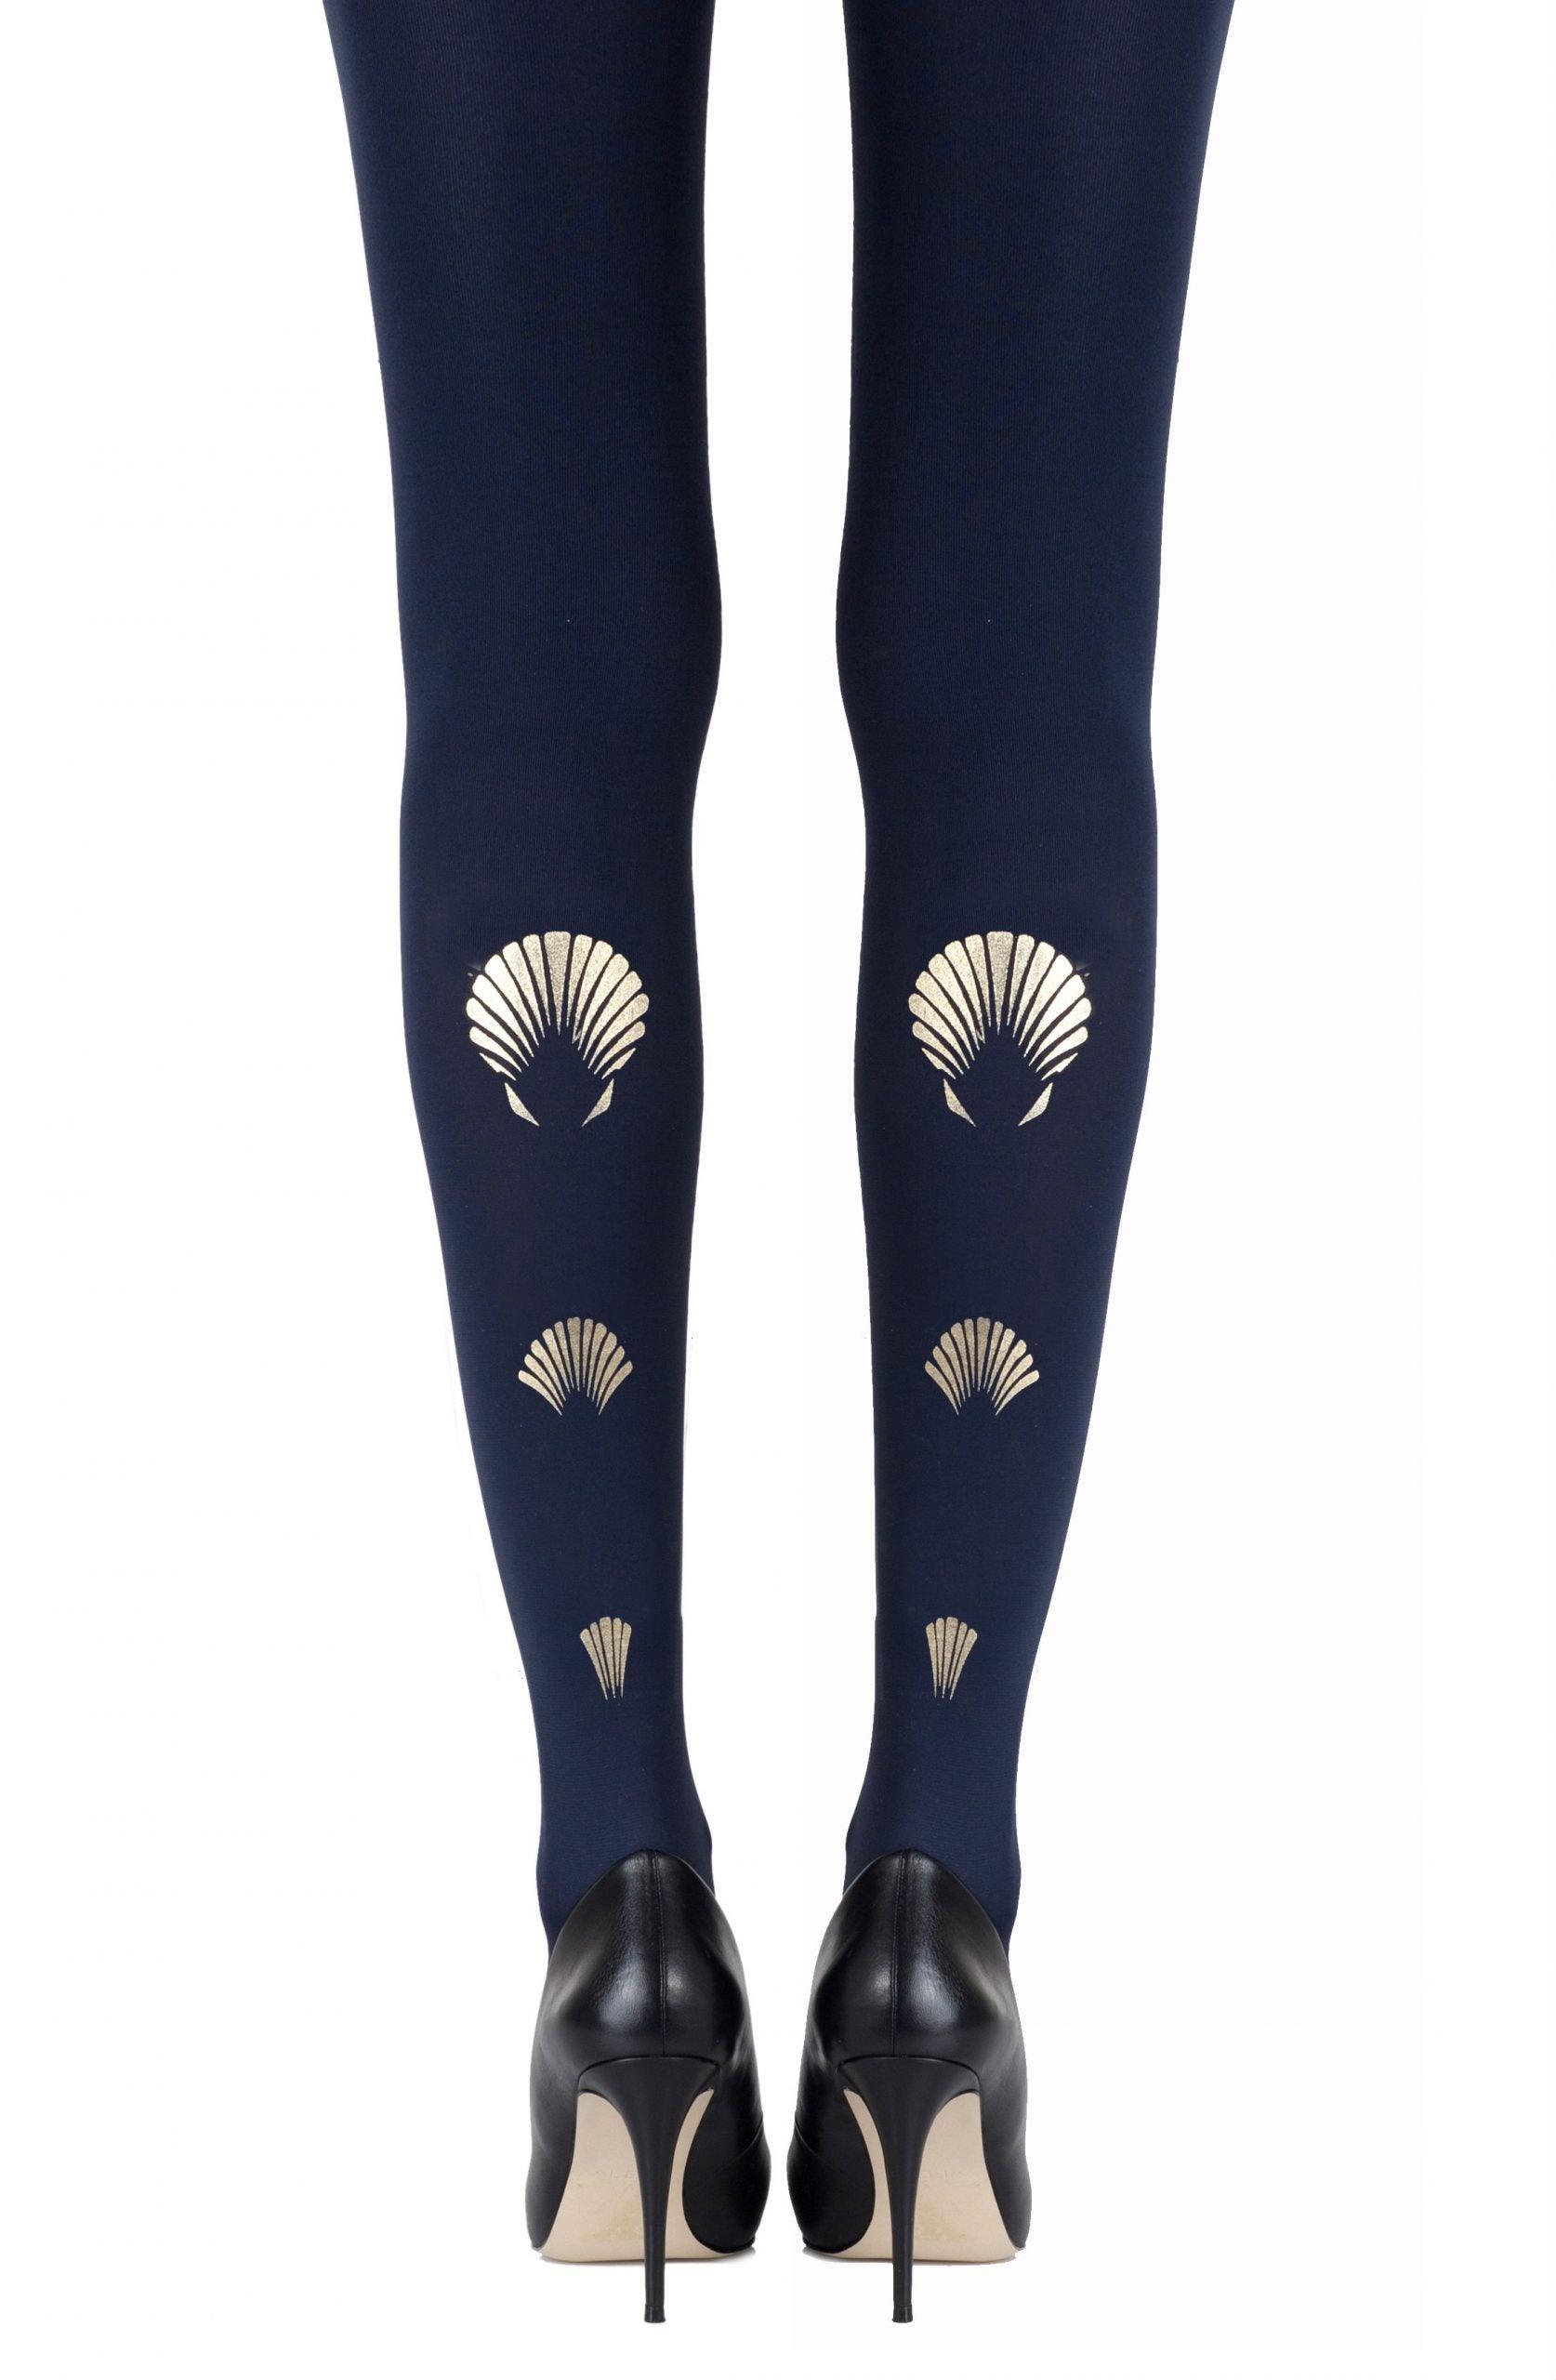 Zohara "What The Shell" Gold Print Tights - Sydney Rose Lingerie 